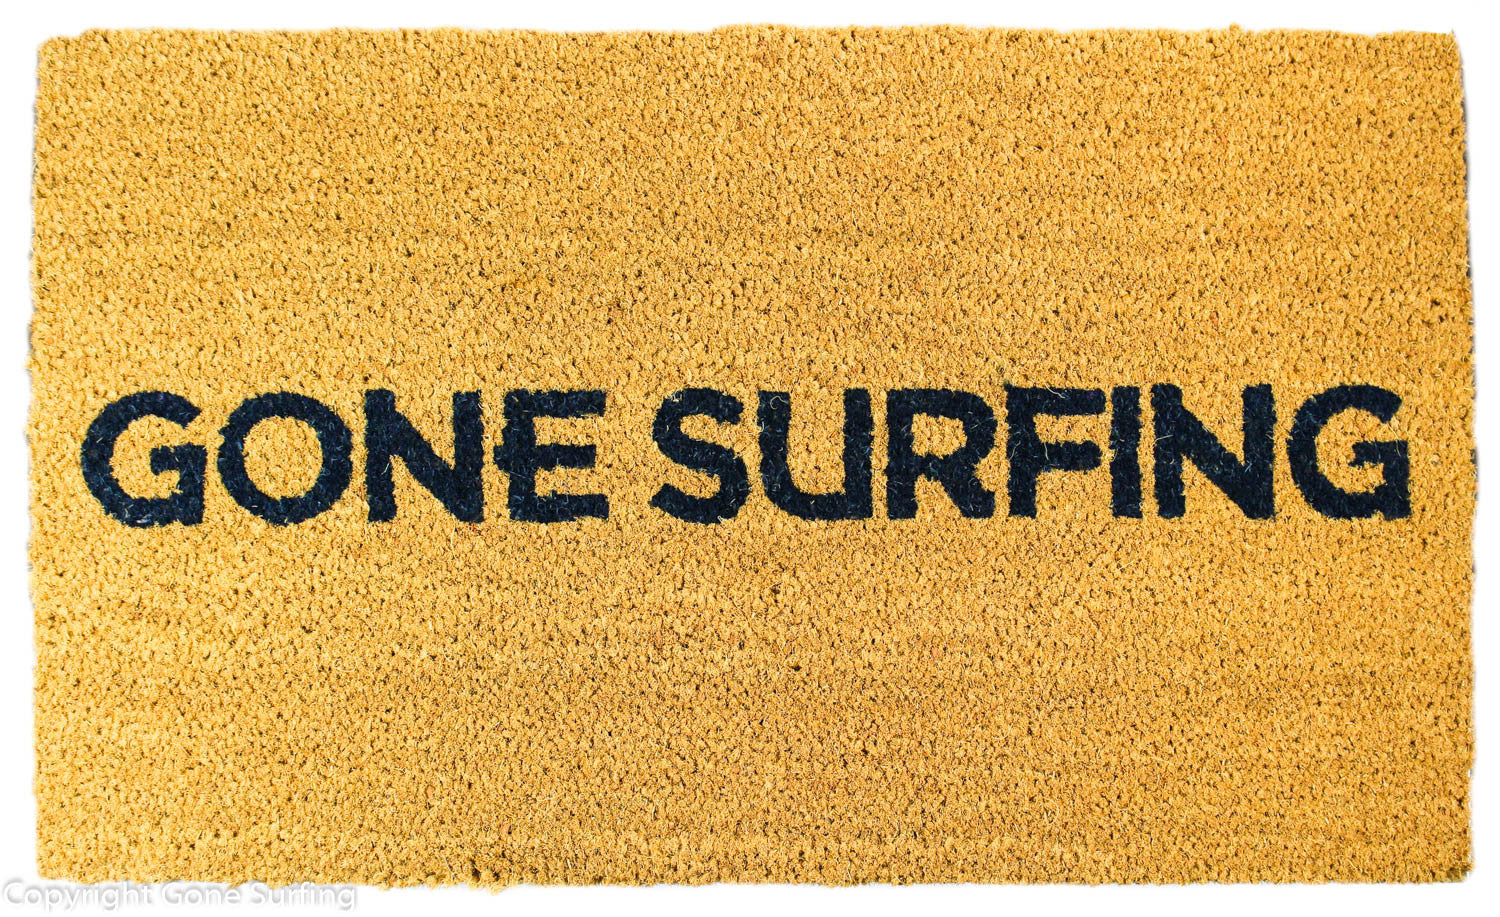 Gone Surfing Company Trademarked Doormat Navy Blue Dye with Gone Surfing in capitals across mat